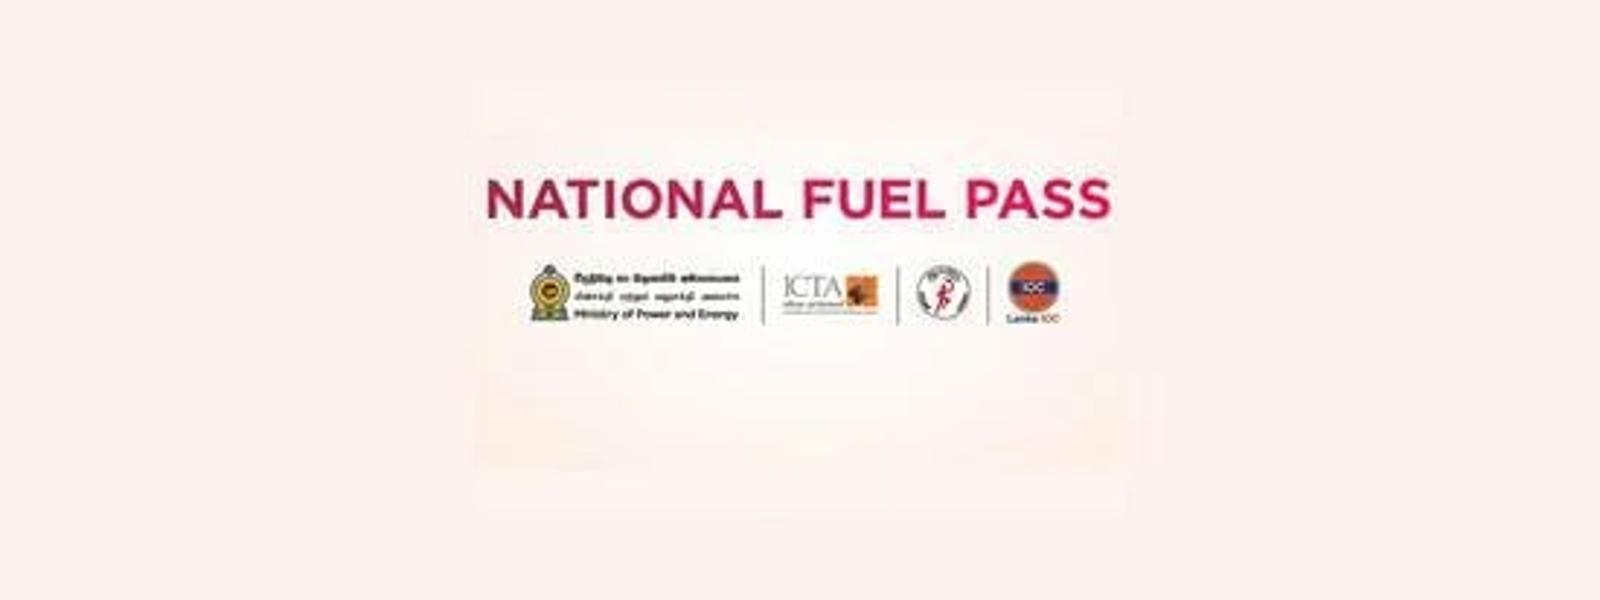 Energy Ministry explains fuel pass system